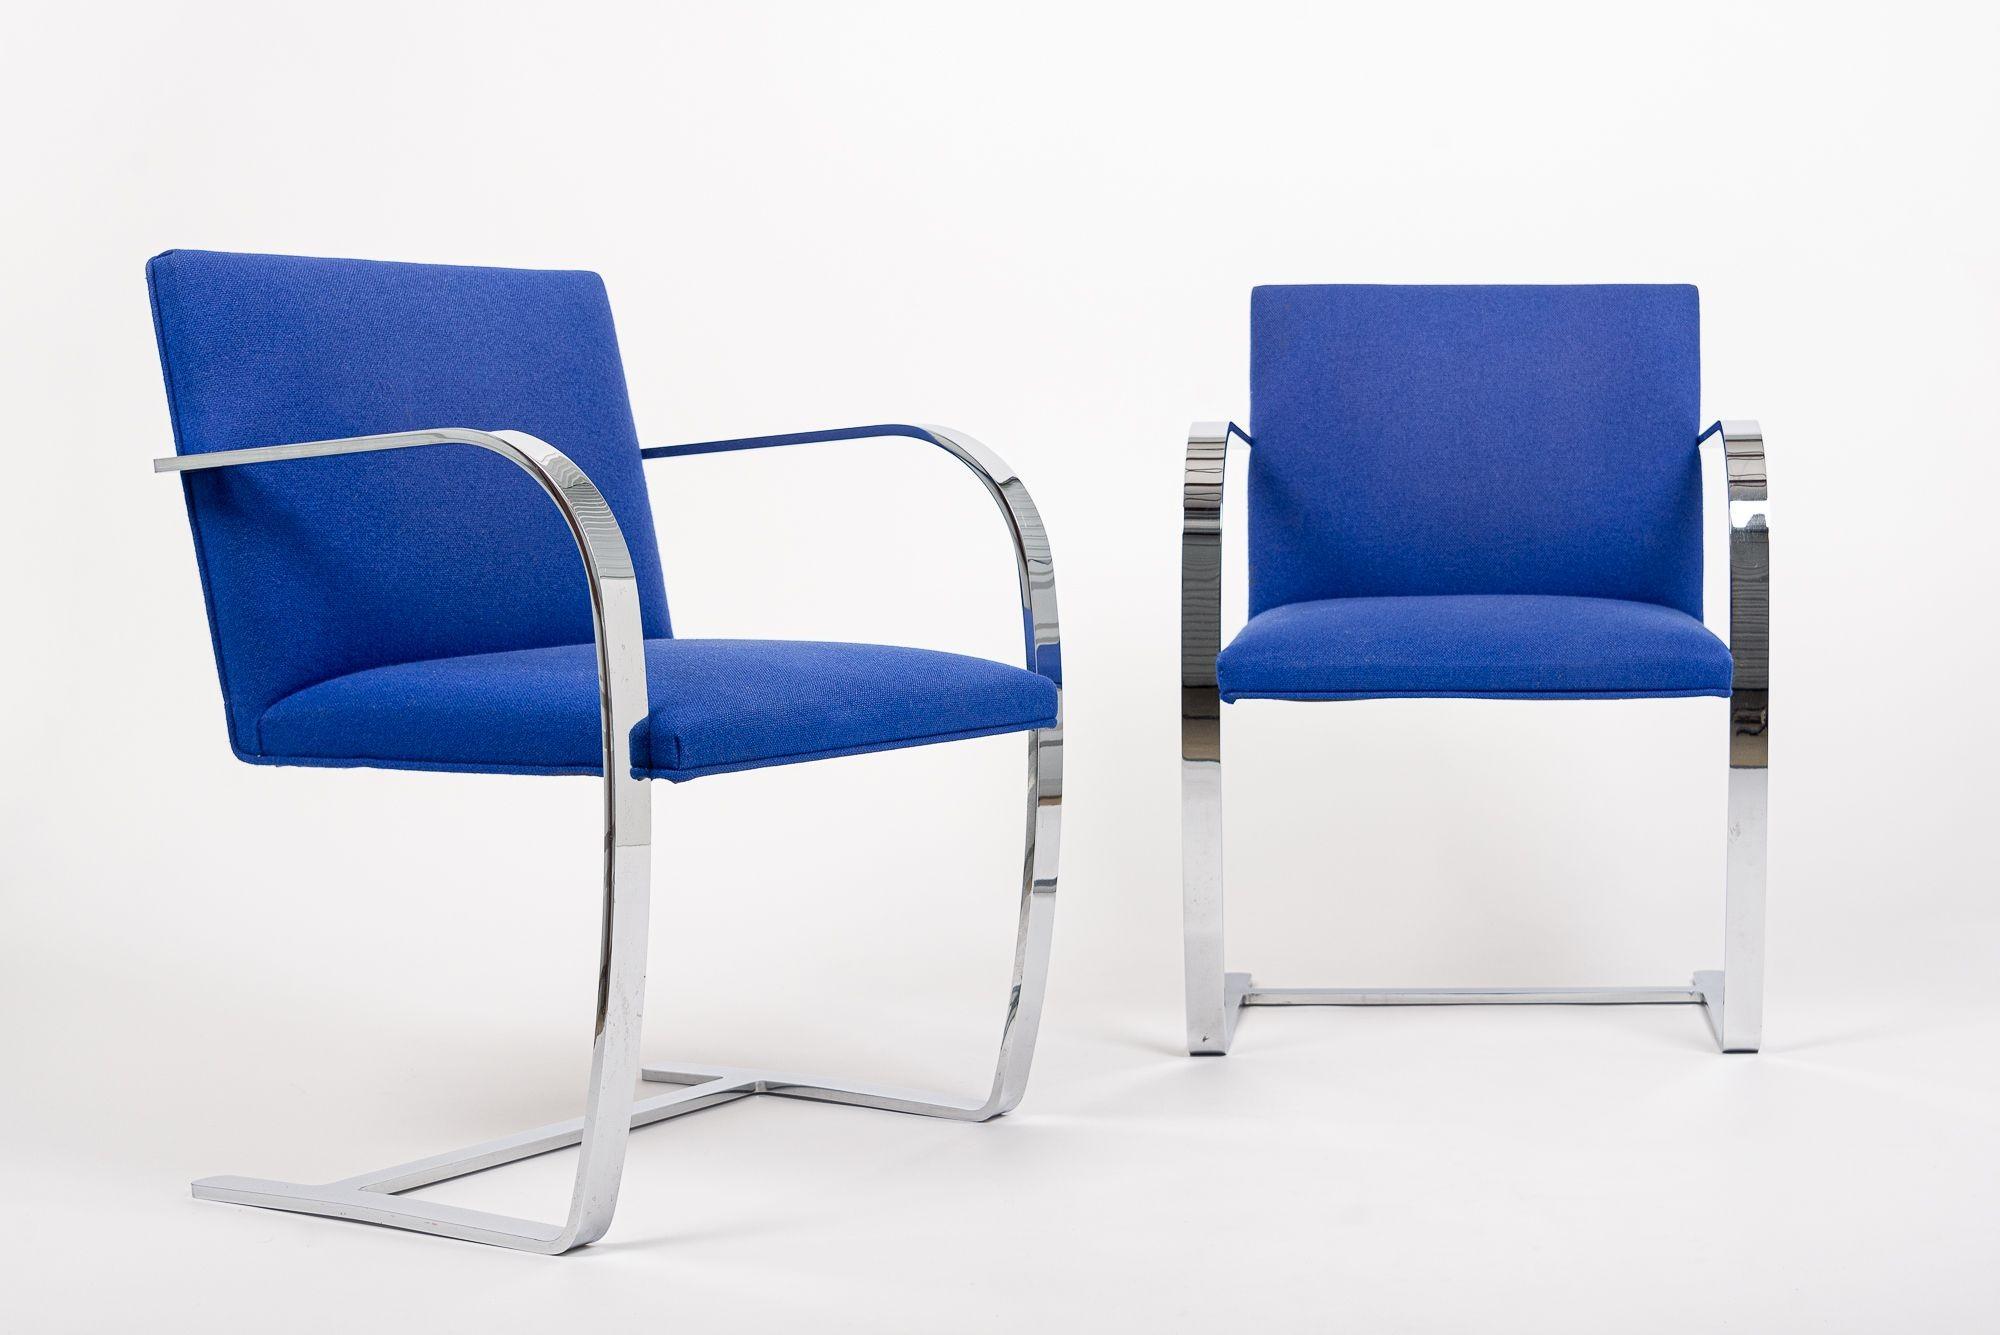 This pair of mid century modern Brno arm chairs by Mies van der Rohe were manufactured by Knoll in 2006. These iconic Bauhaus chairs were designed by Ludwig Mies van der Rohe in 1930 for the Tugendhat residence in Brno, Czechoslovakia. With clean,